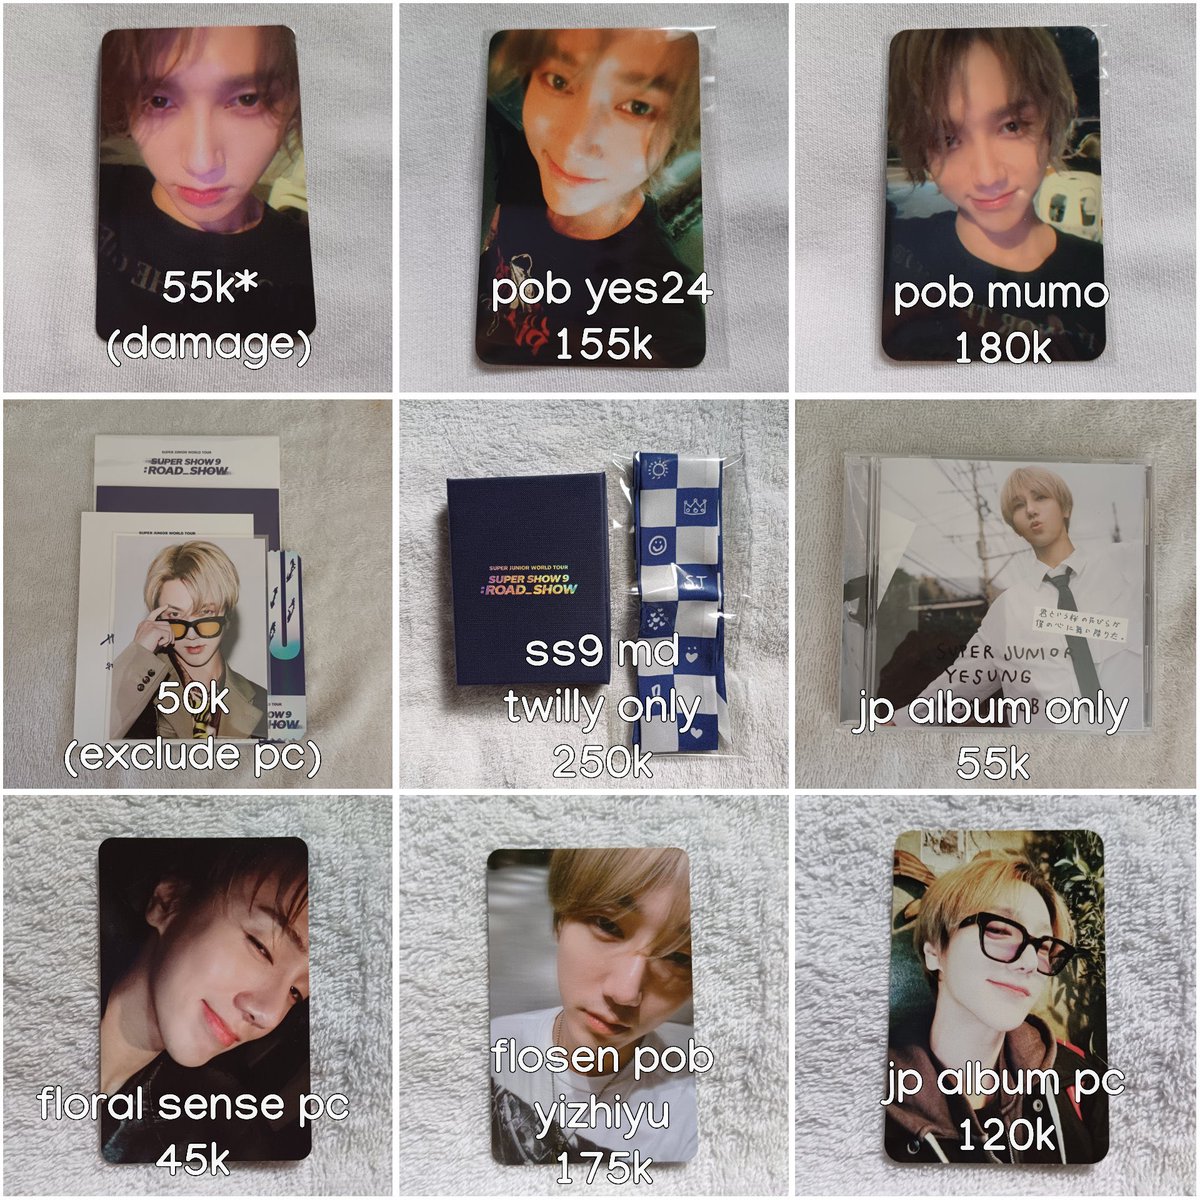 💙 • #skypop_ina • wts lfb ph

SUPER JUNIOR PHOTOCARDS

✽ payo to secure
✽ strictly no cancellations
✽ pricing:
    ➥ IDR ÷ 250 + 90
    ➥ isf to follow once onhand

☁️ suju sj pc the road ss9 twilly md  yesung japanese jp album floral sense unfading sense yes24 mumo yzy…